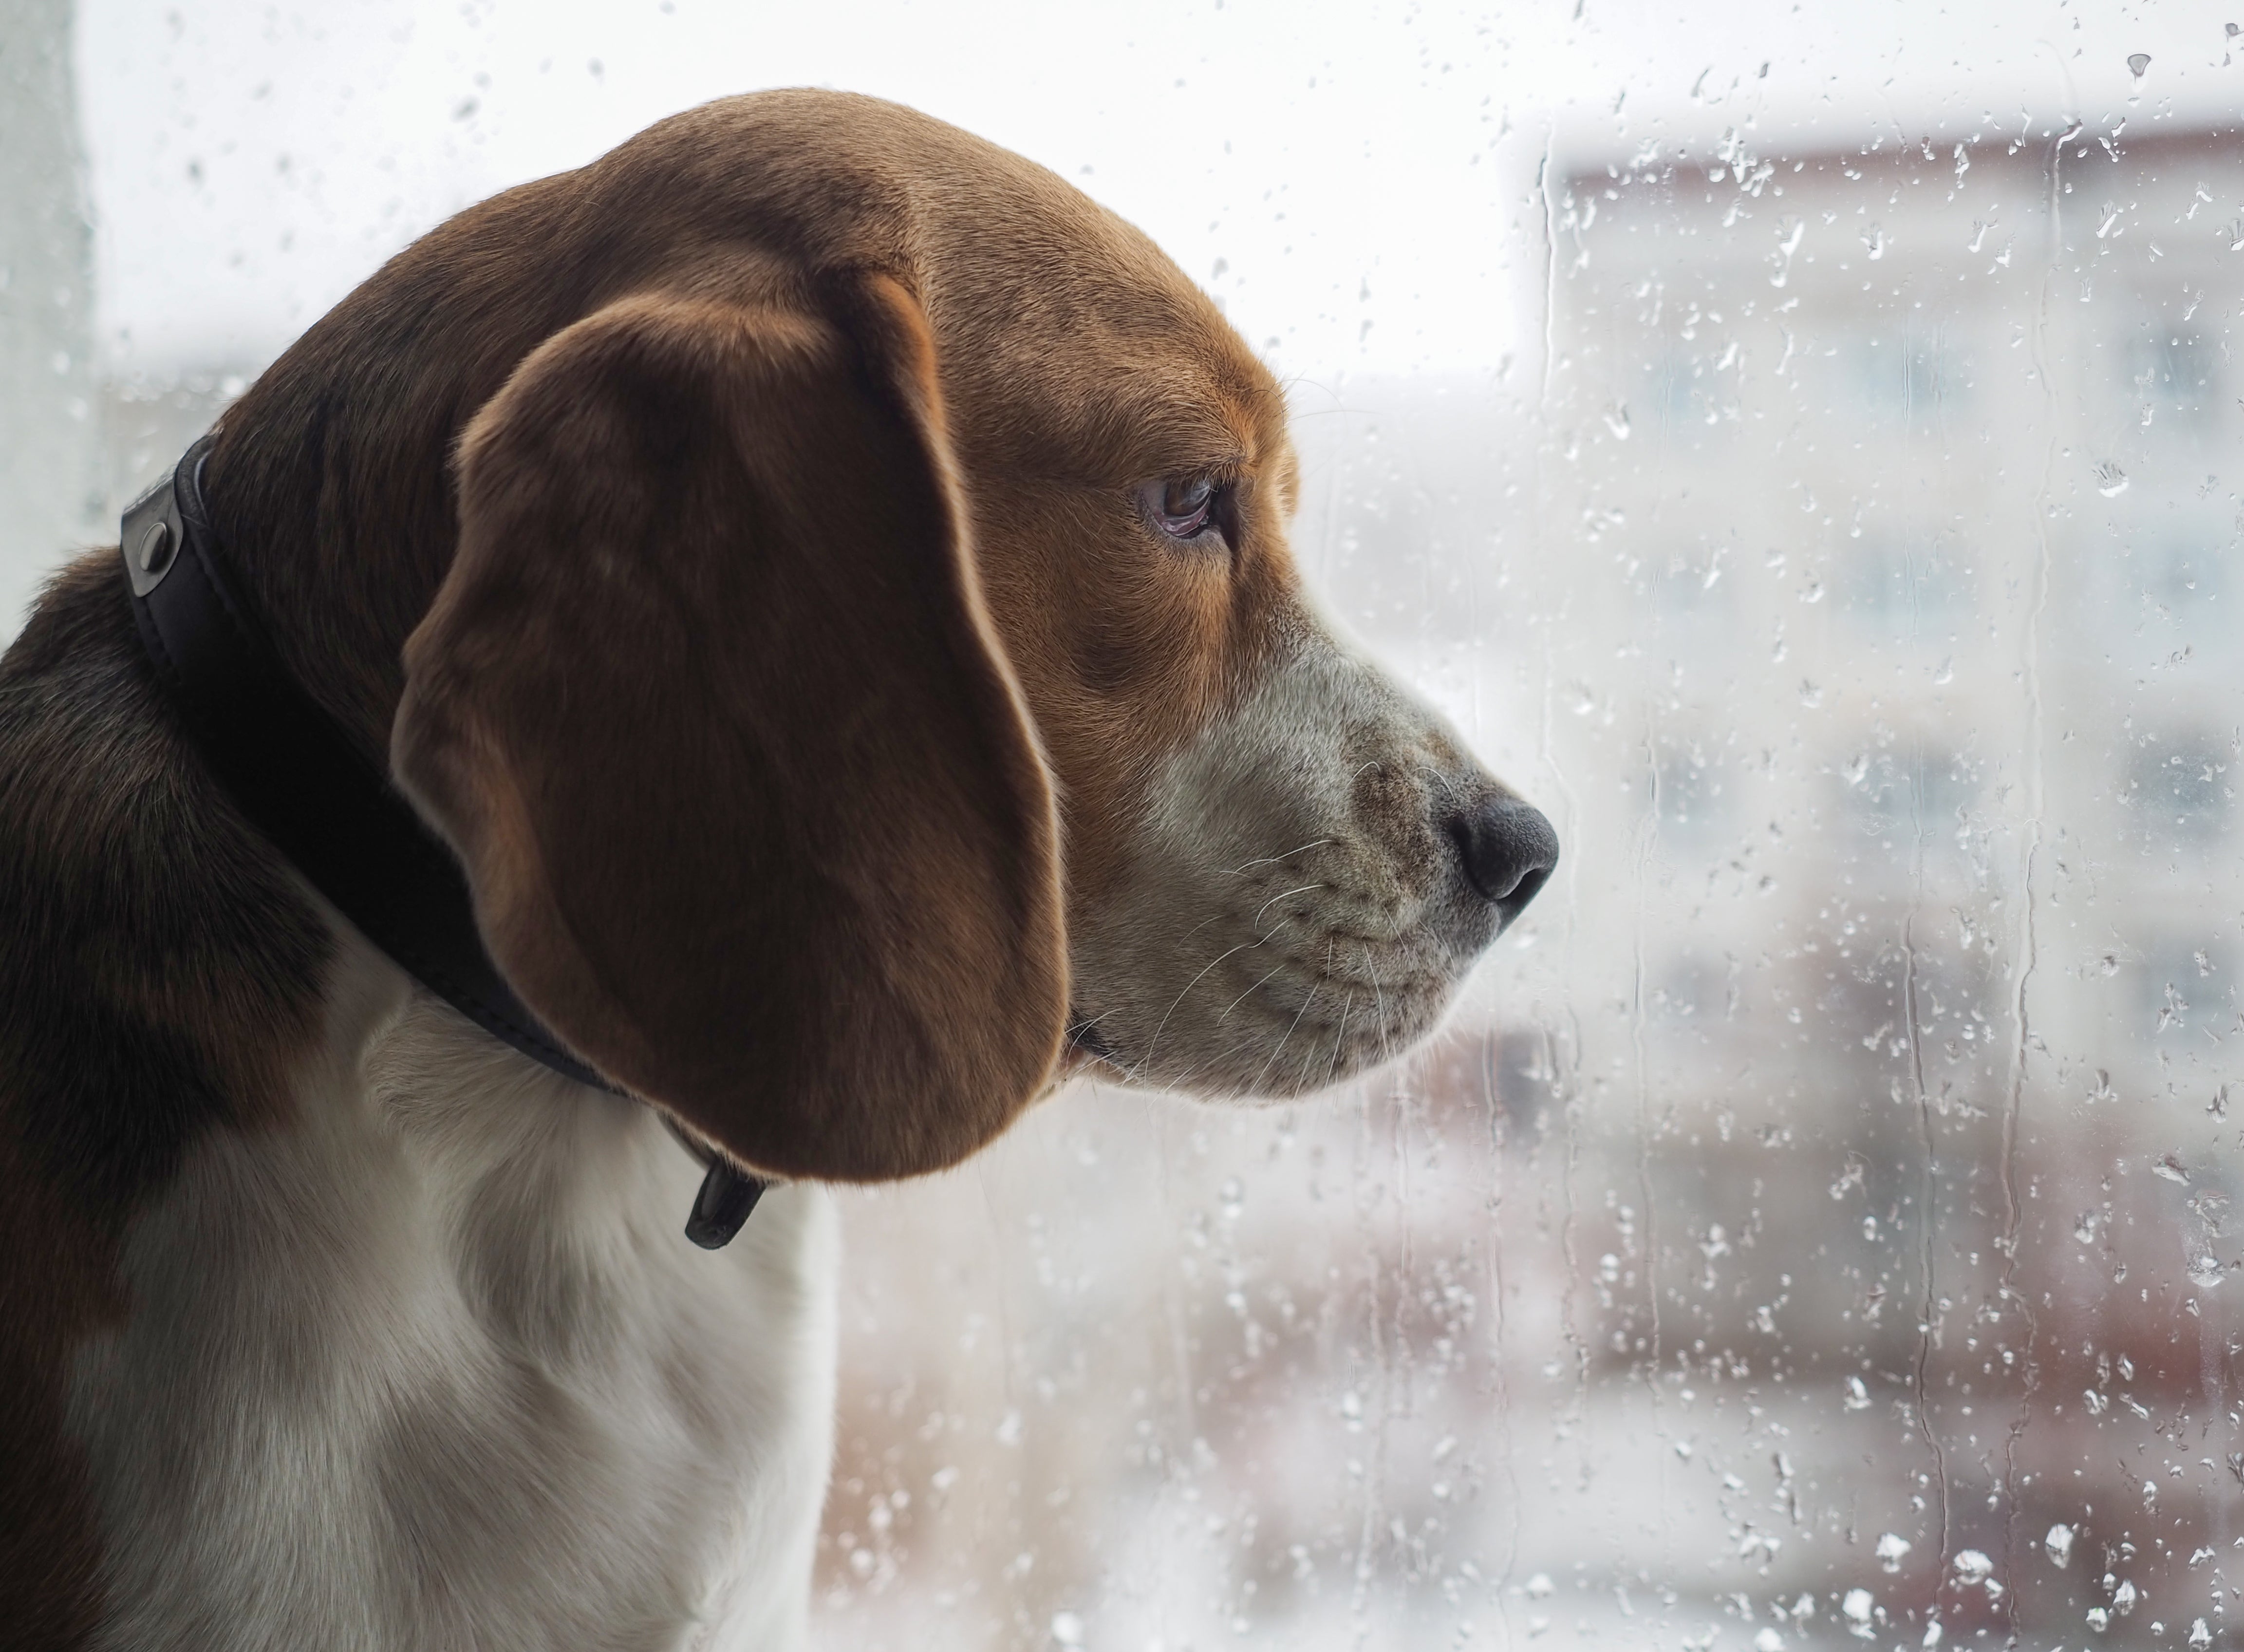 Sad dog looking out of window